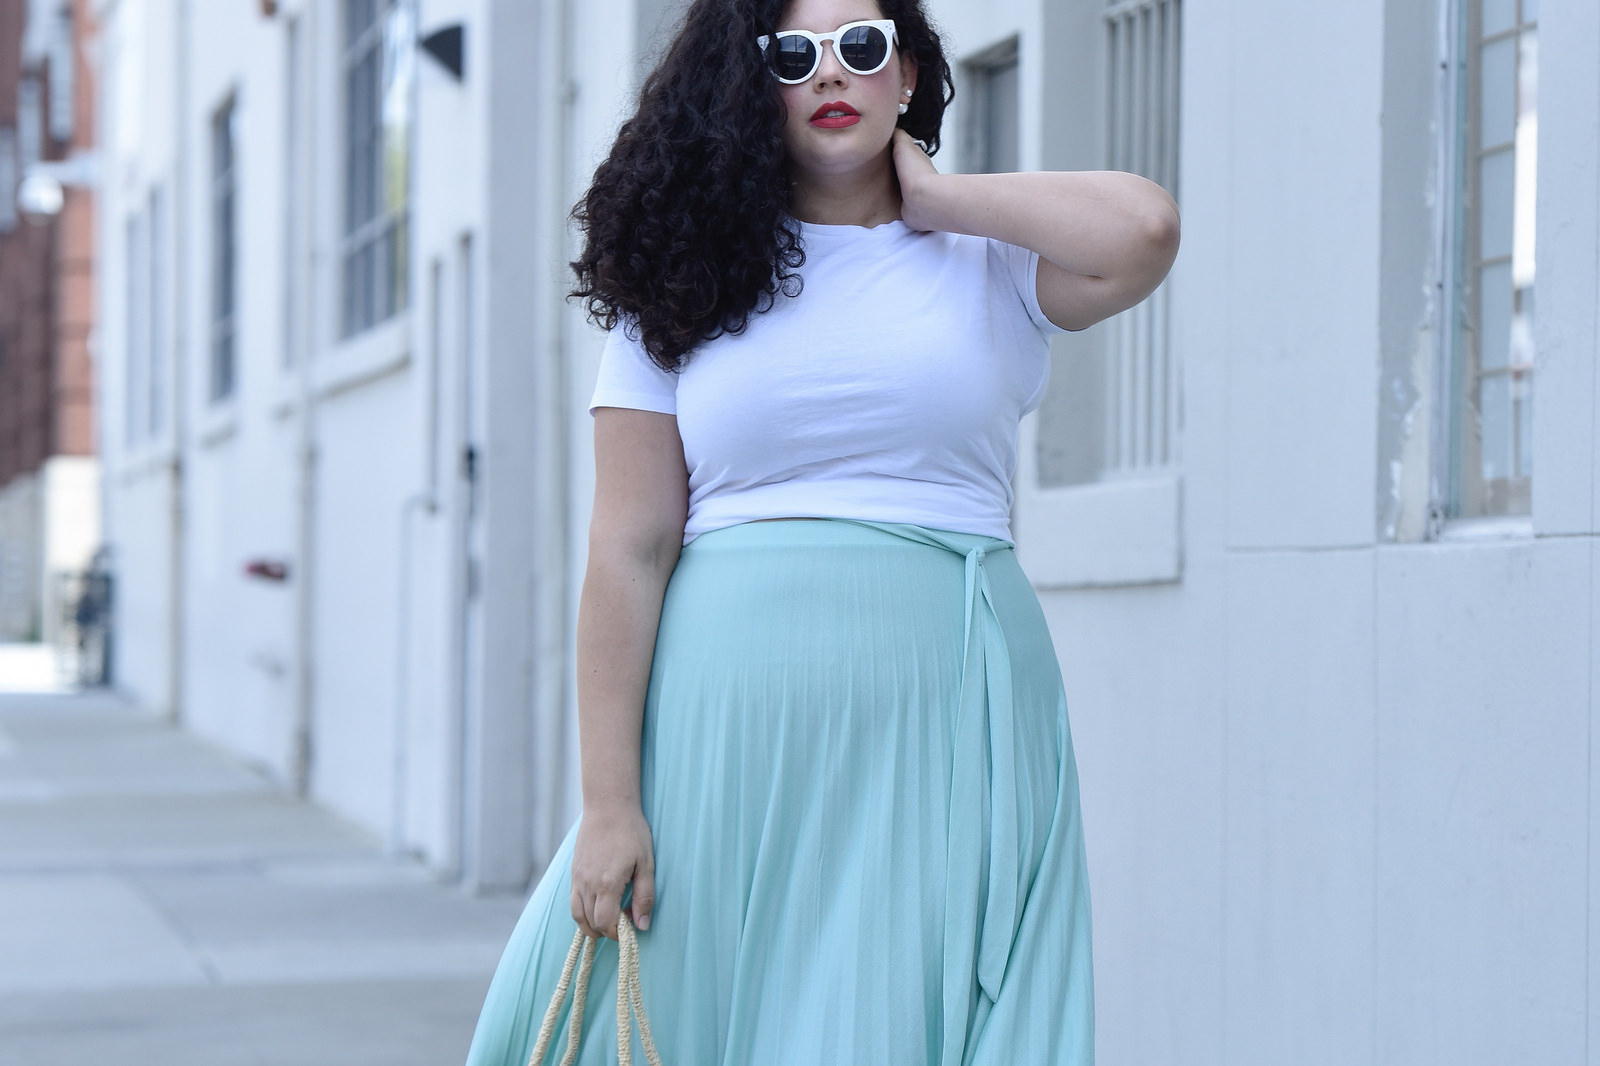 An Unexpected Way to Pull Off Pastels via @GirlWithCurves #style #fashion #ootd